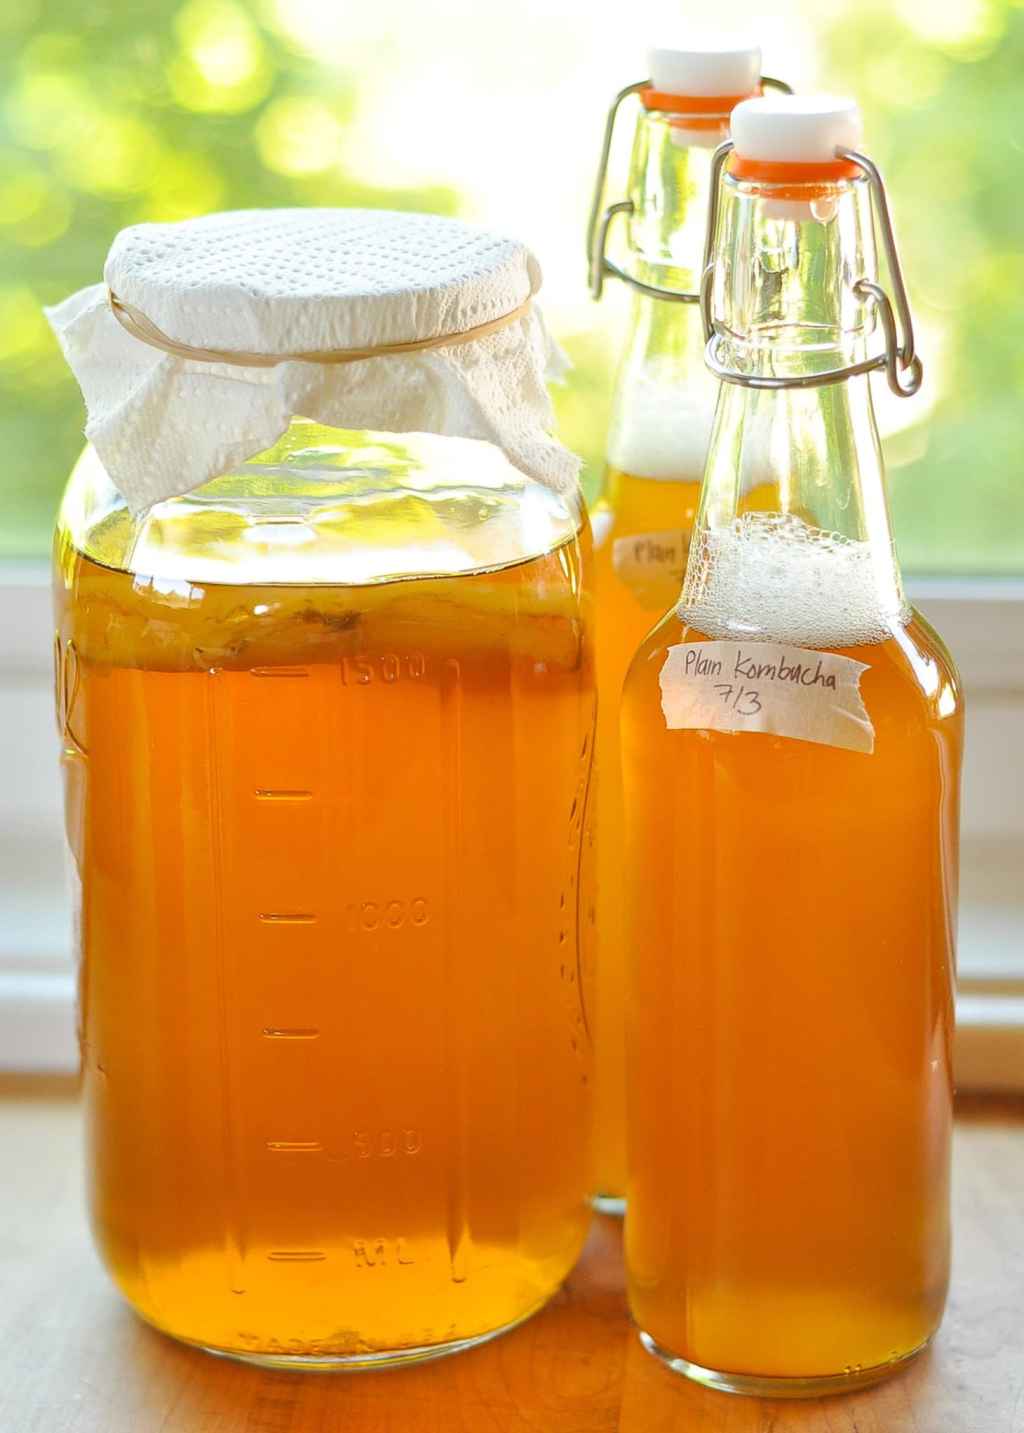 “Discover the Health Benefits of Kombucha: The Refreshing Fermented Tea You Need to Try!”